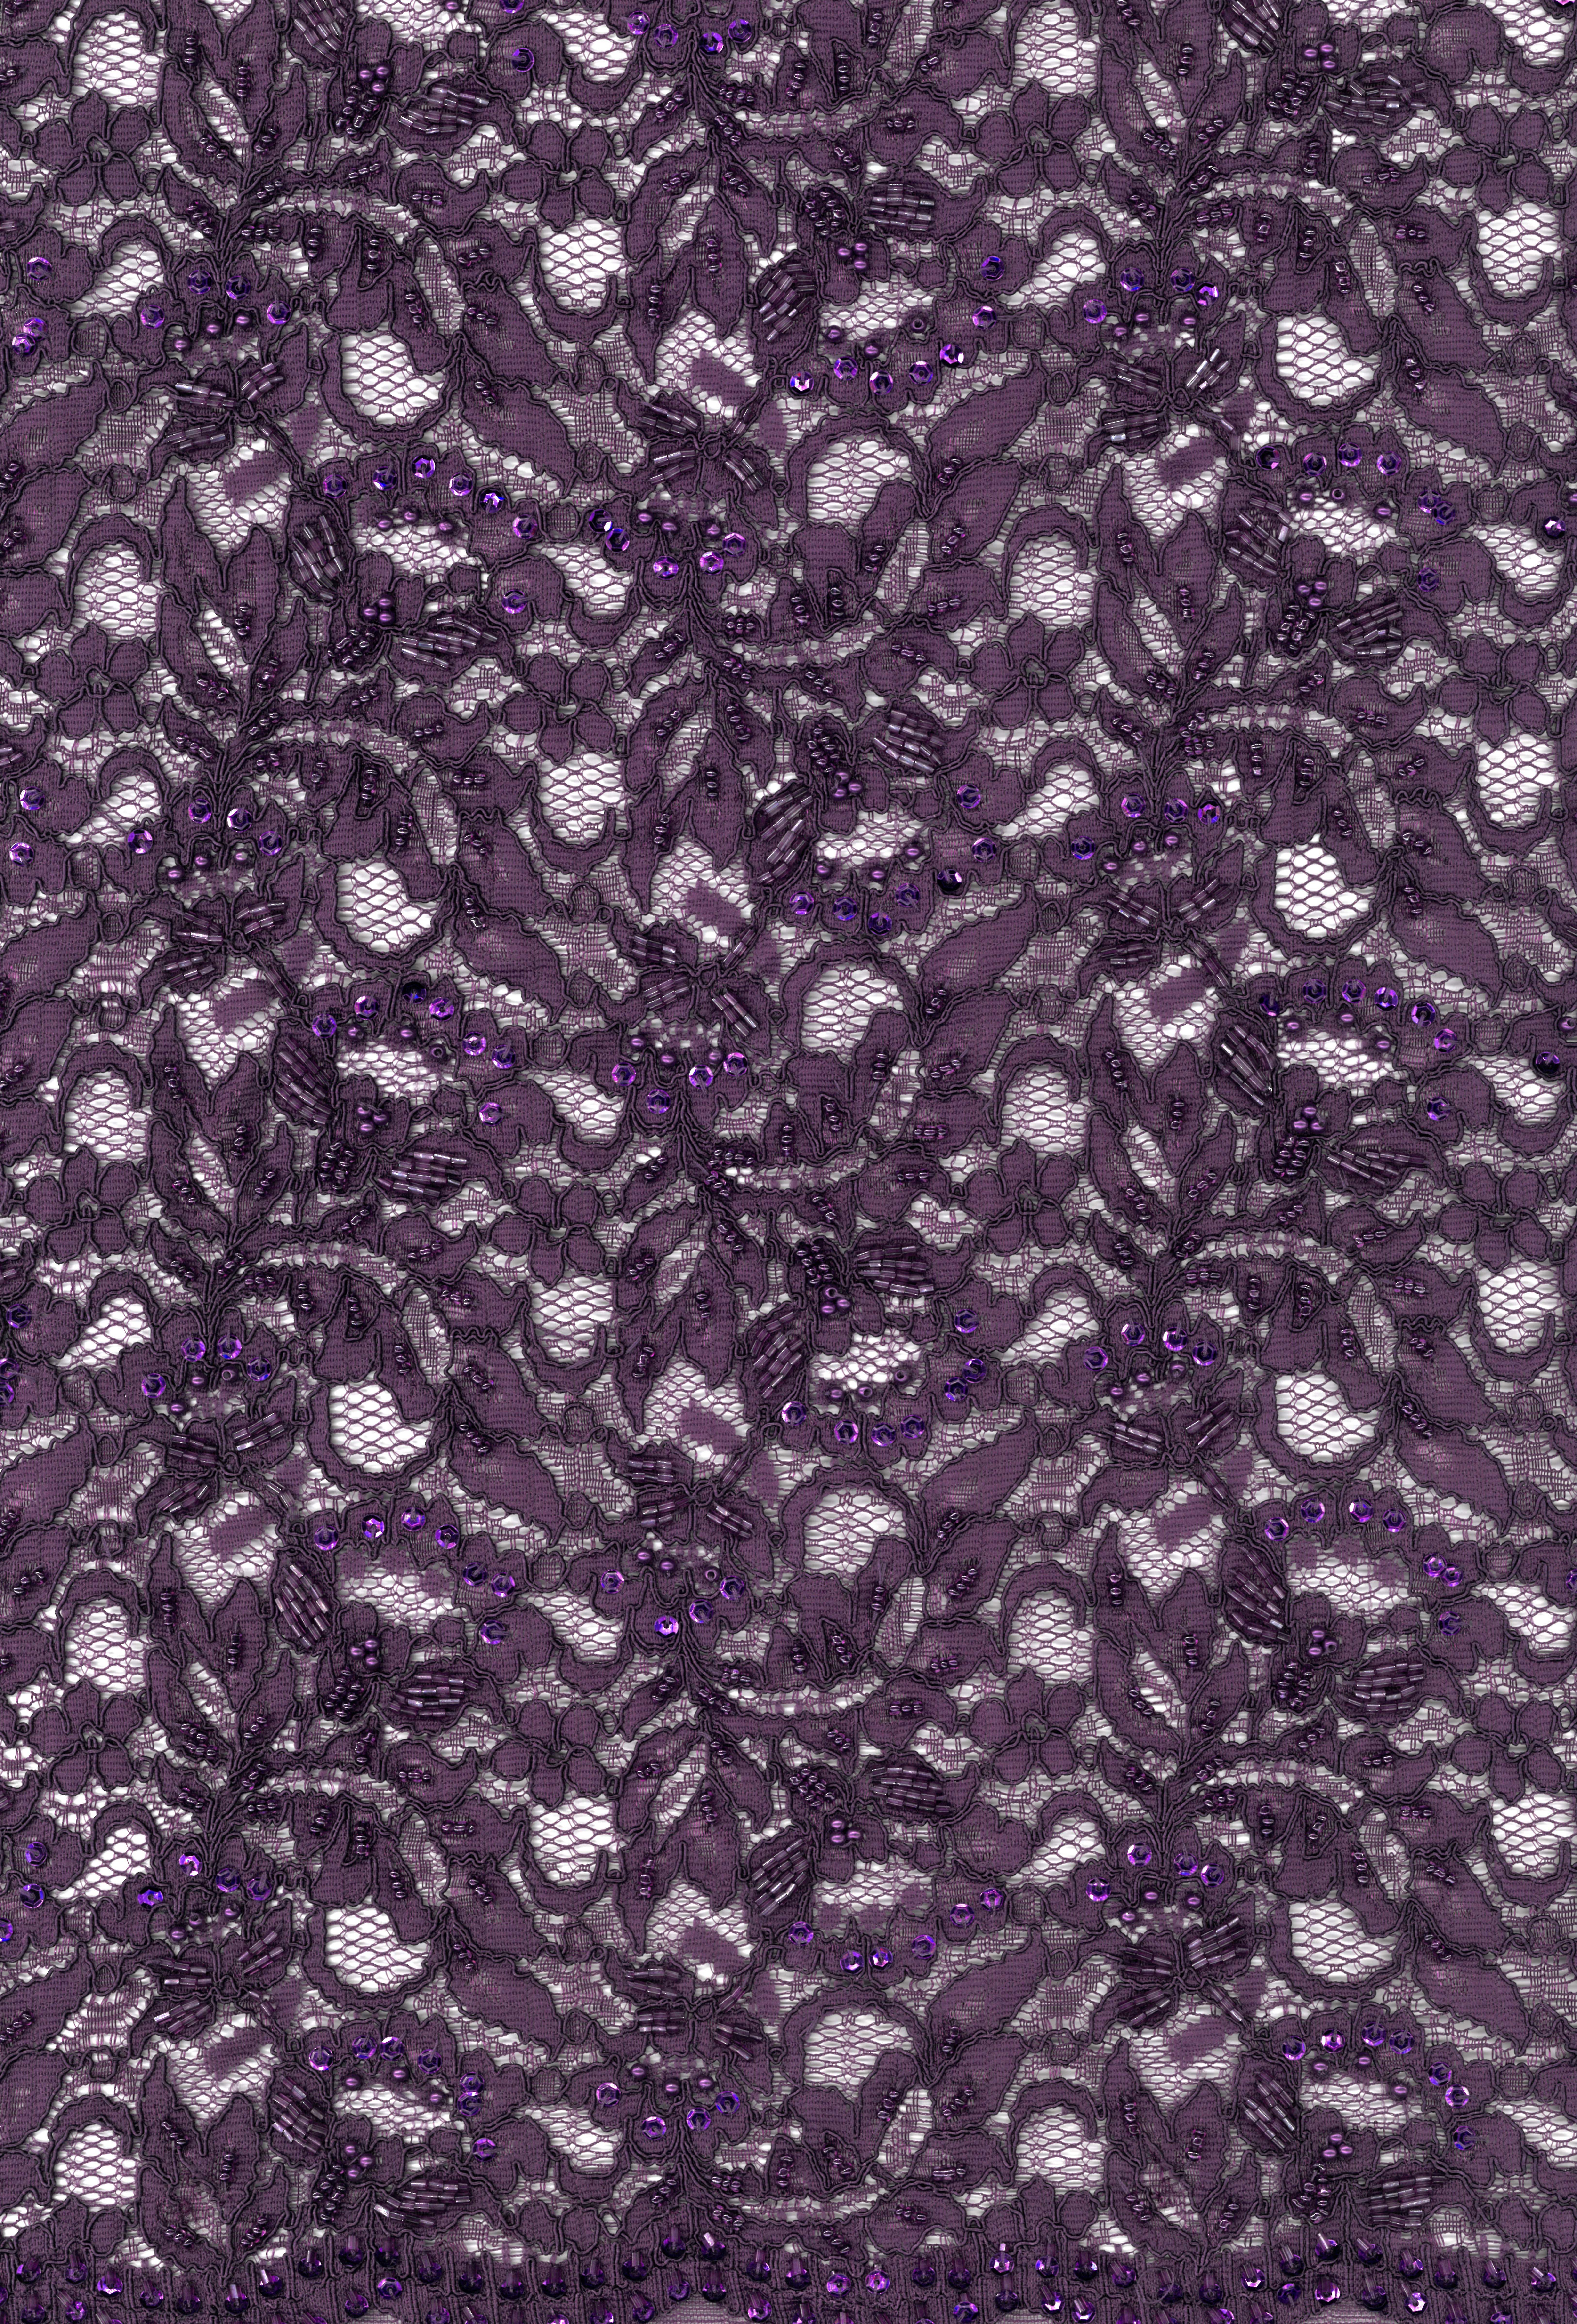 CORDED BEADED LACE - PURPLE